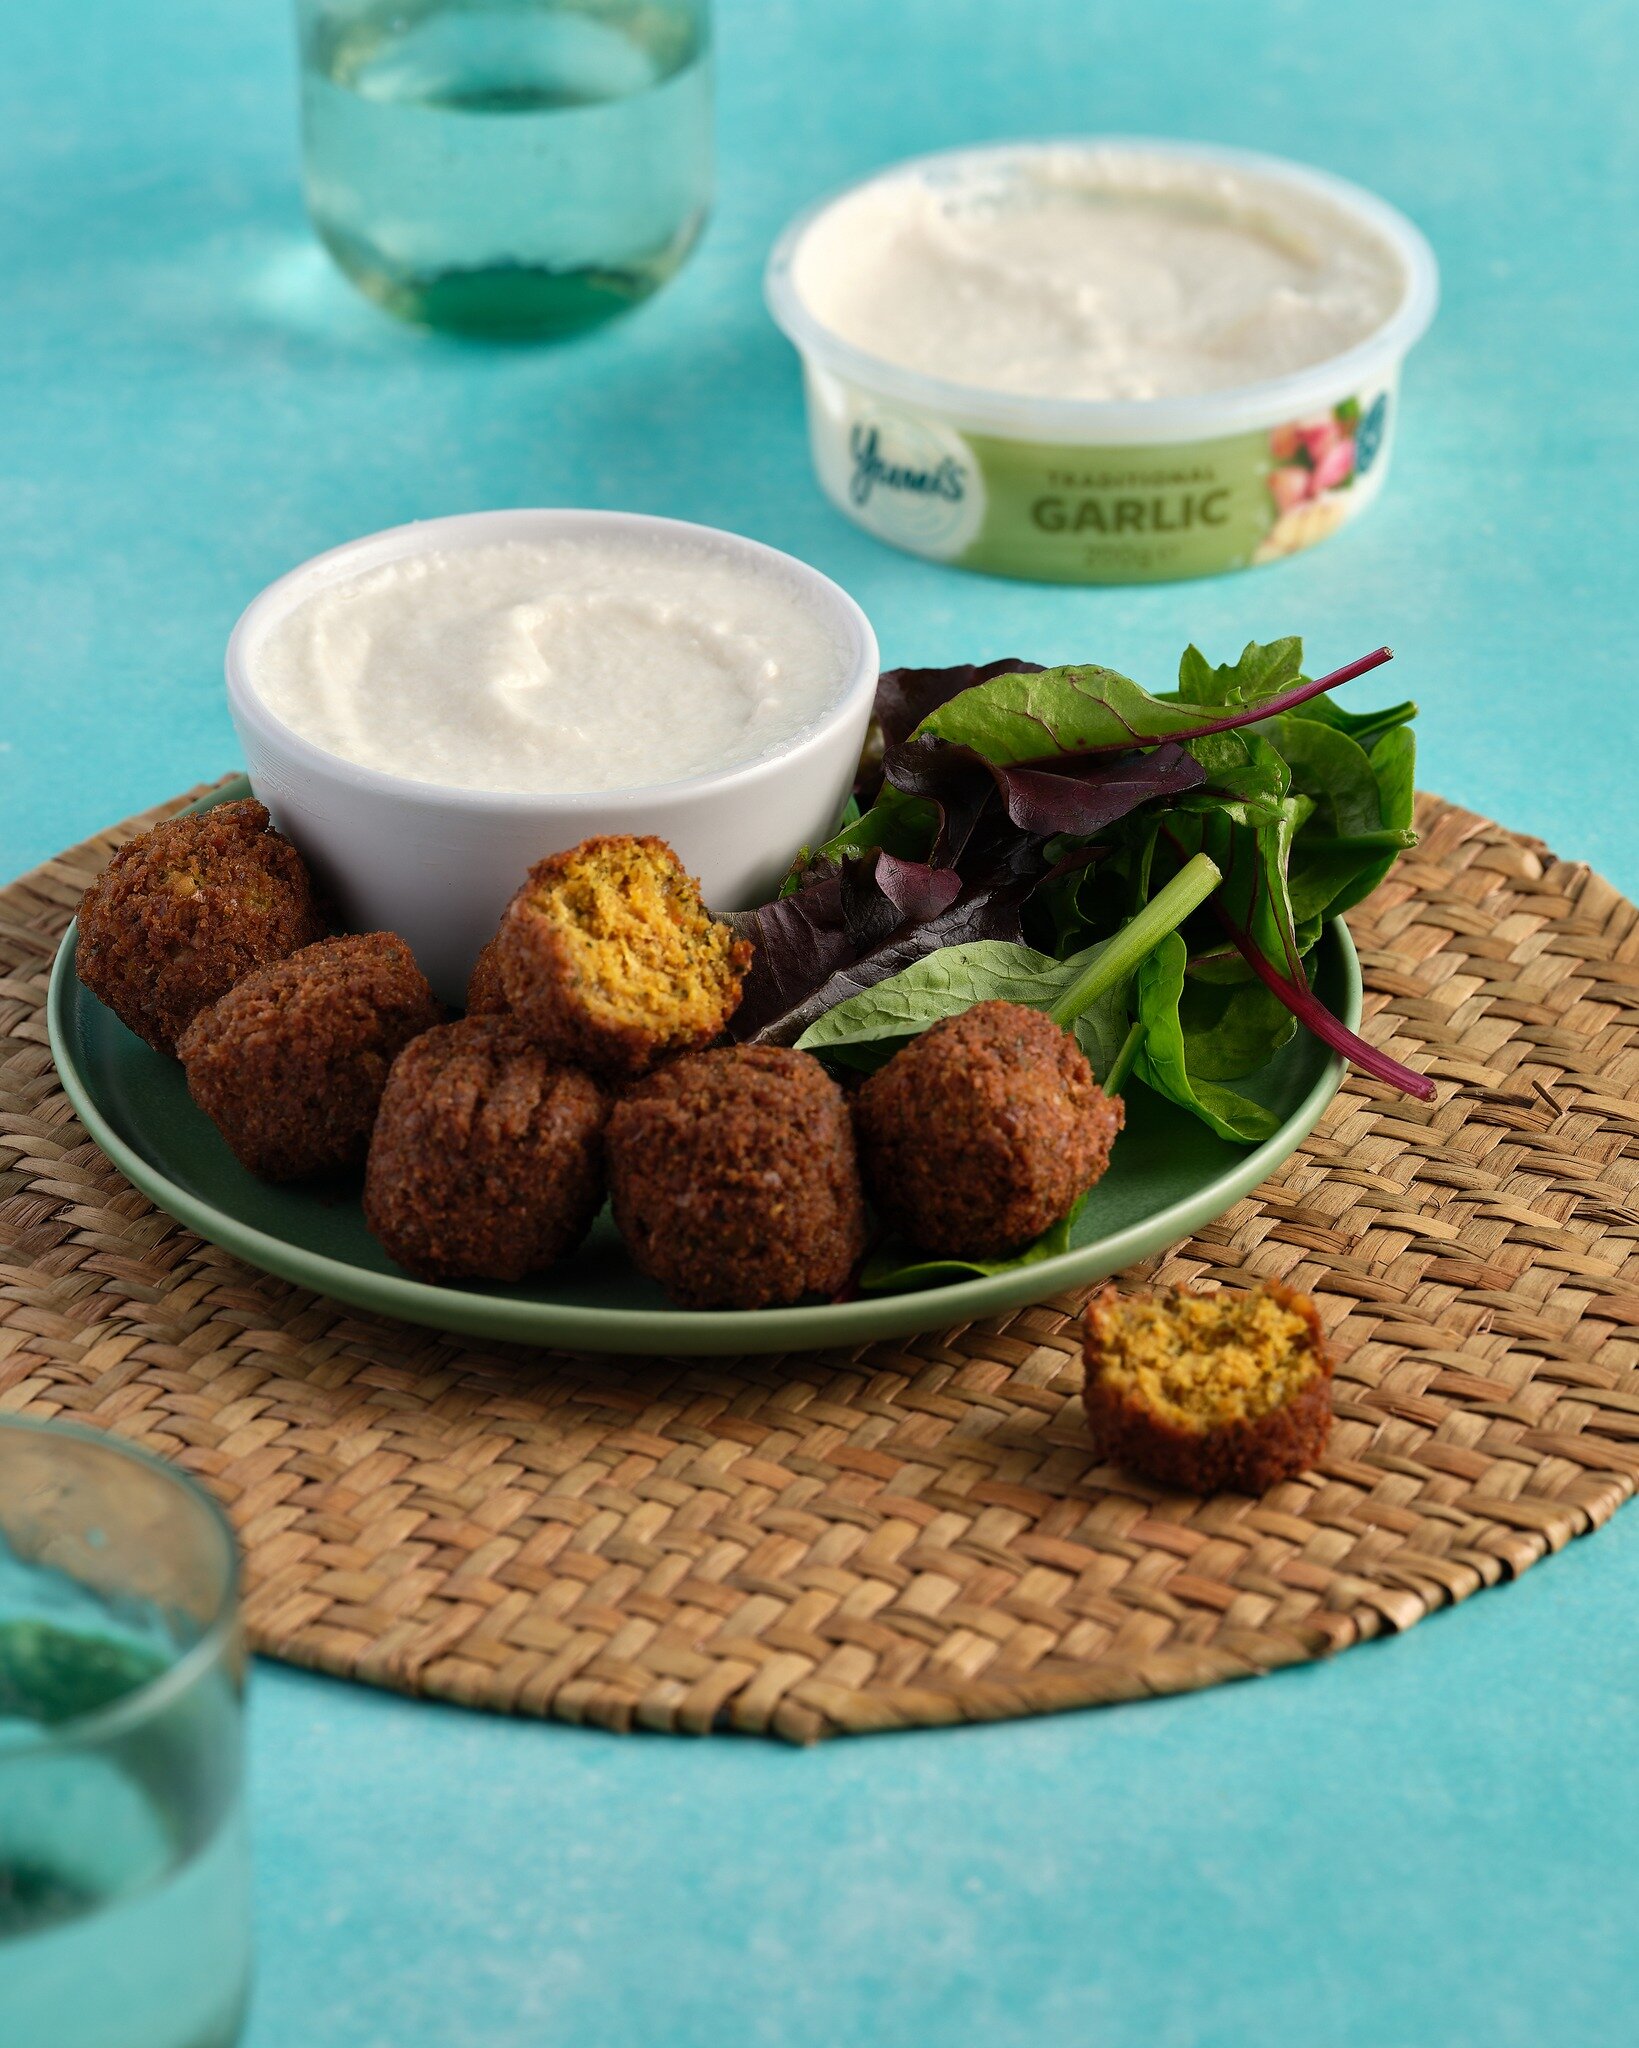 Much like these...

🍟+🍦

🧂+ 🍉 

🥒+ 🥜

... Our Falafels + Garlic Dip make an unforgettable pairing!

.

.

.

.

#yumis #yumisdips  #plate #food #yummy #pairs #classic #tasty #love